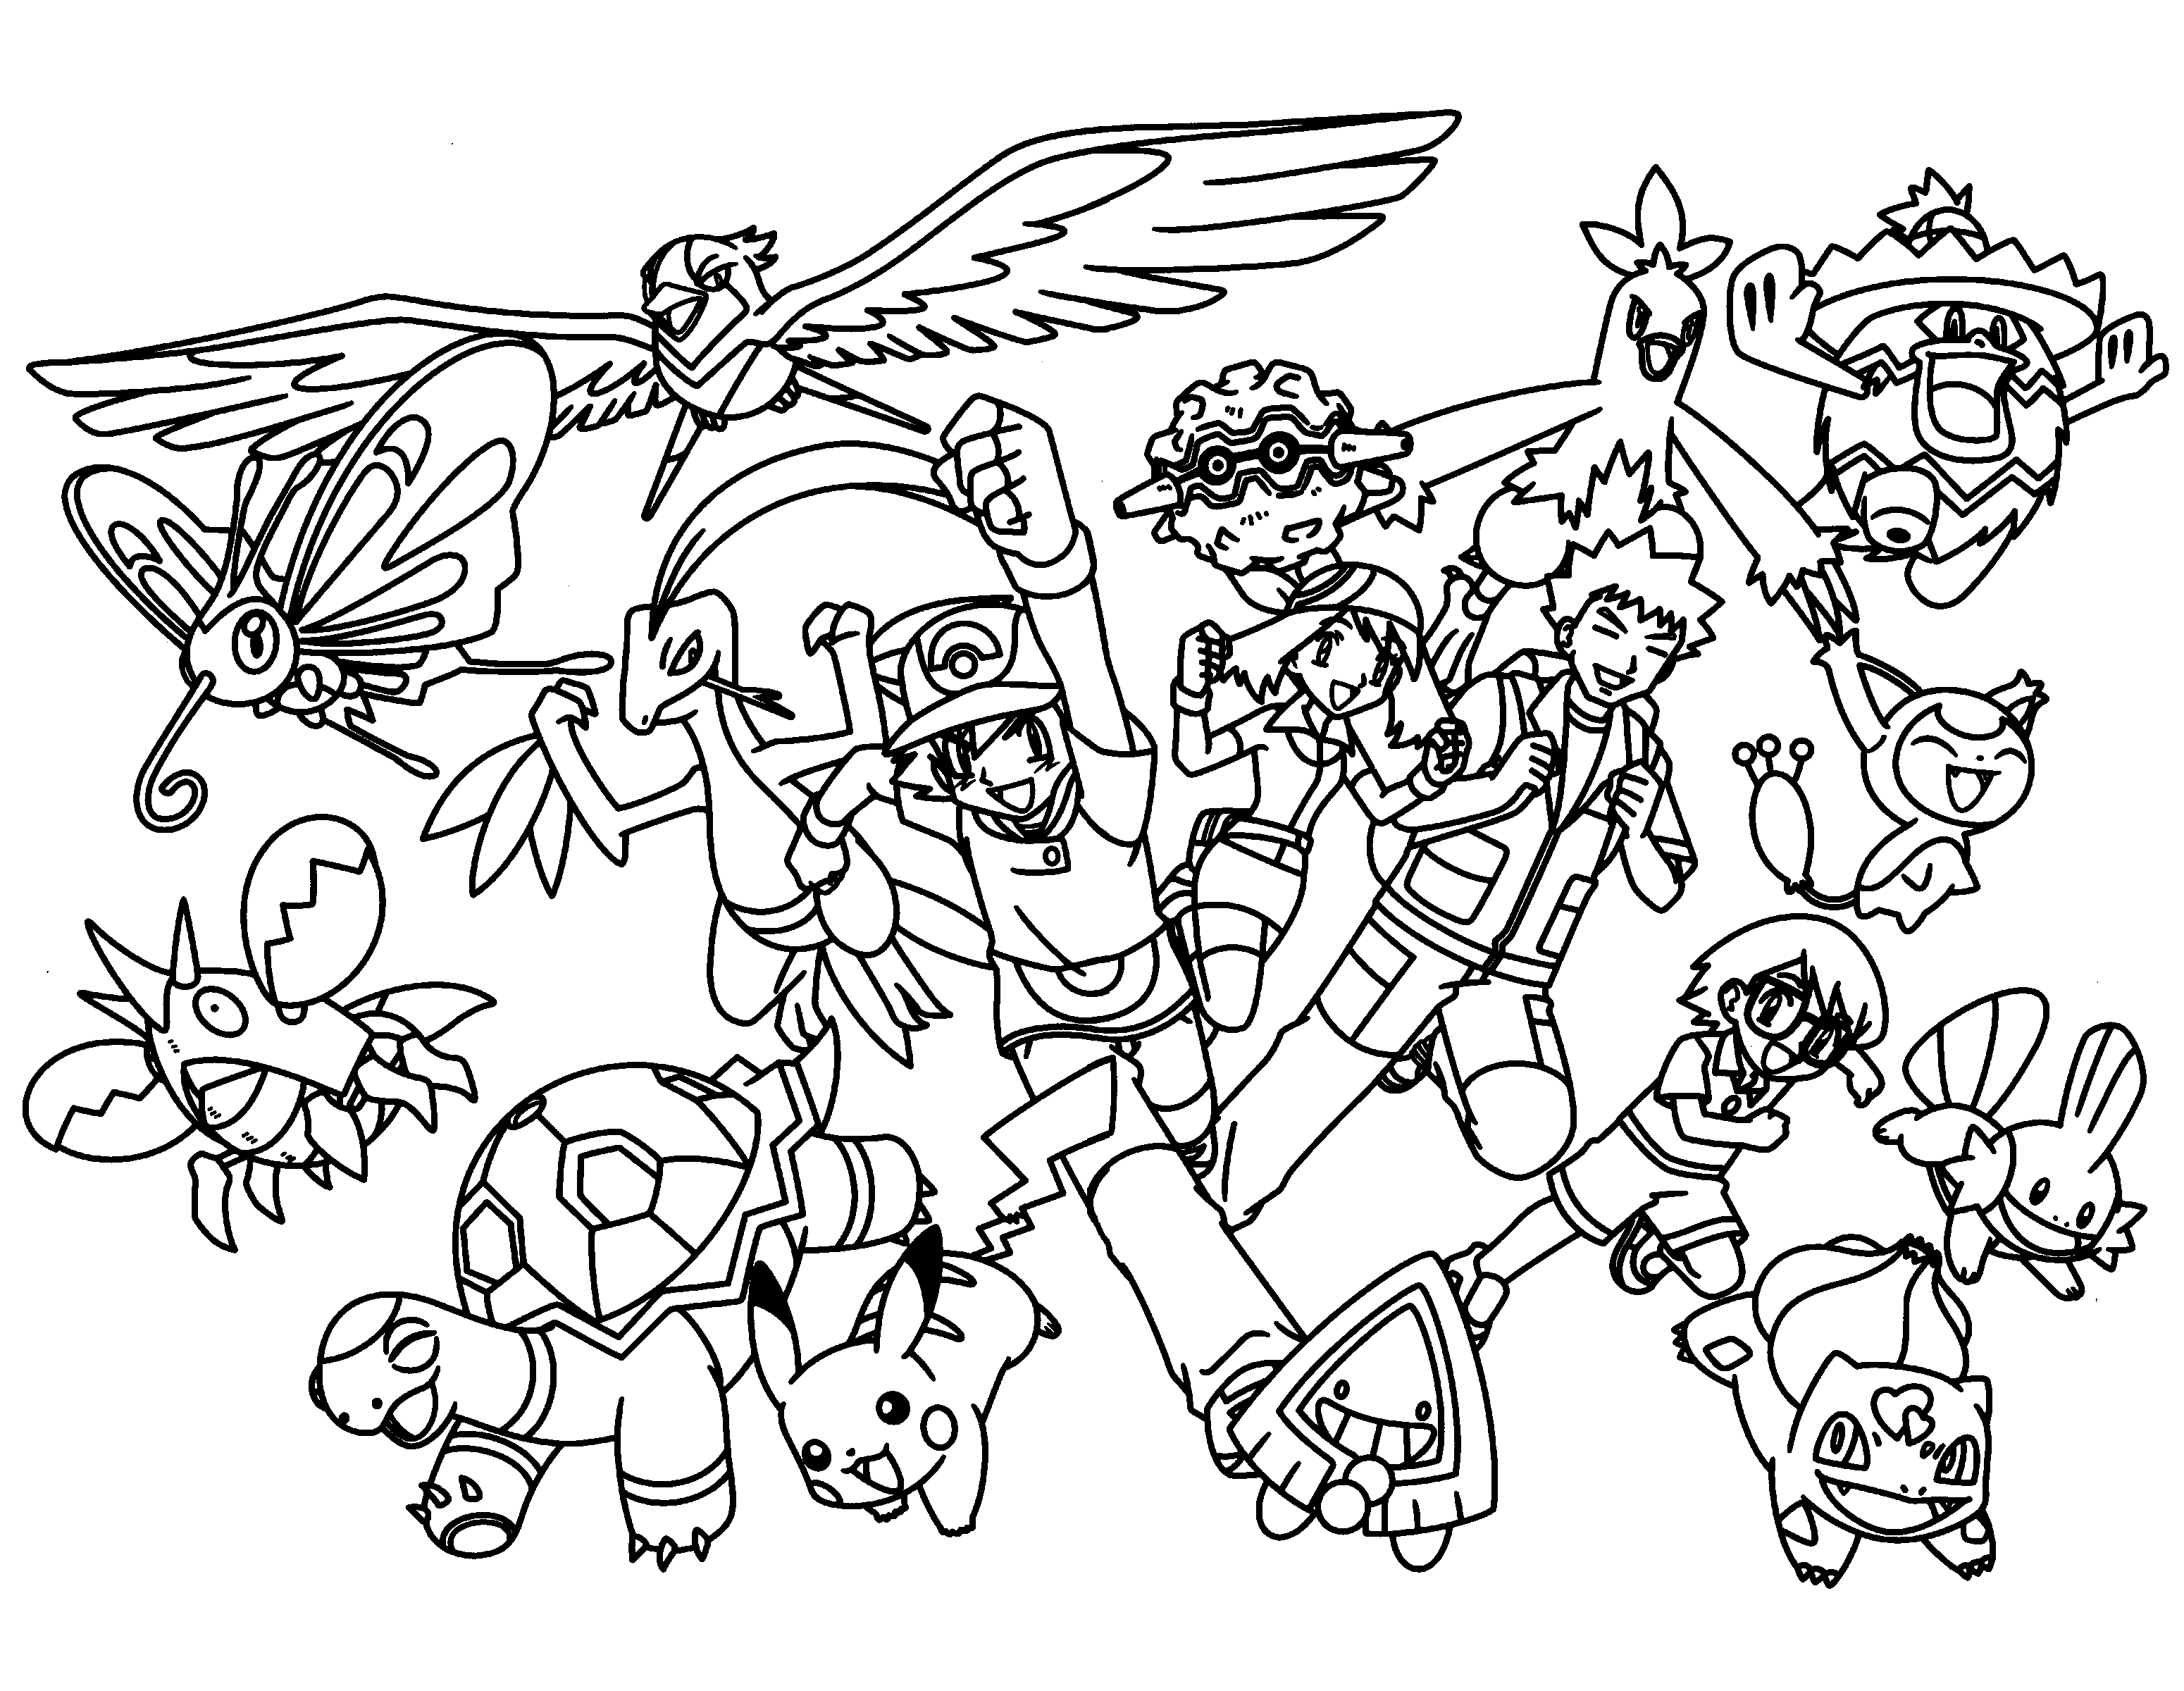 Download Coloring Pages Pokemon Images